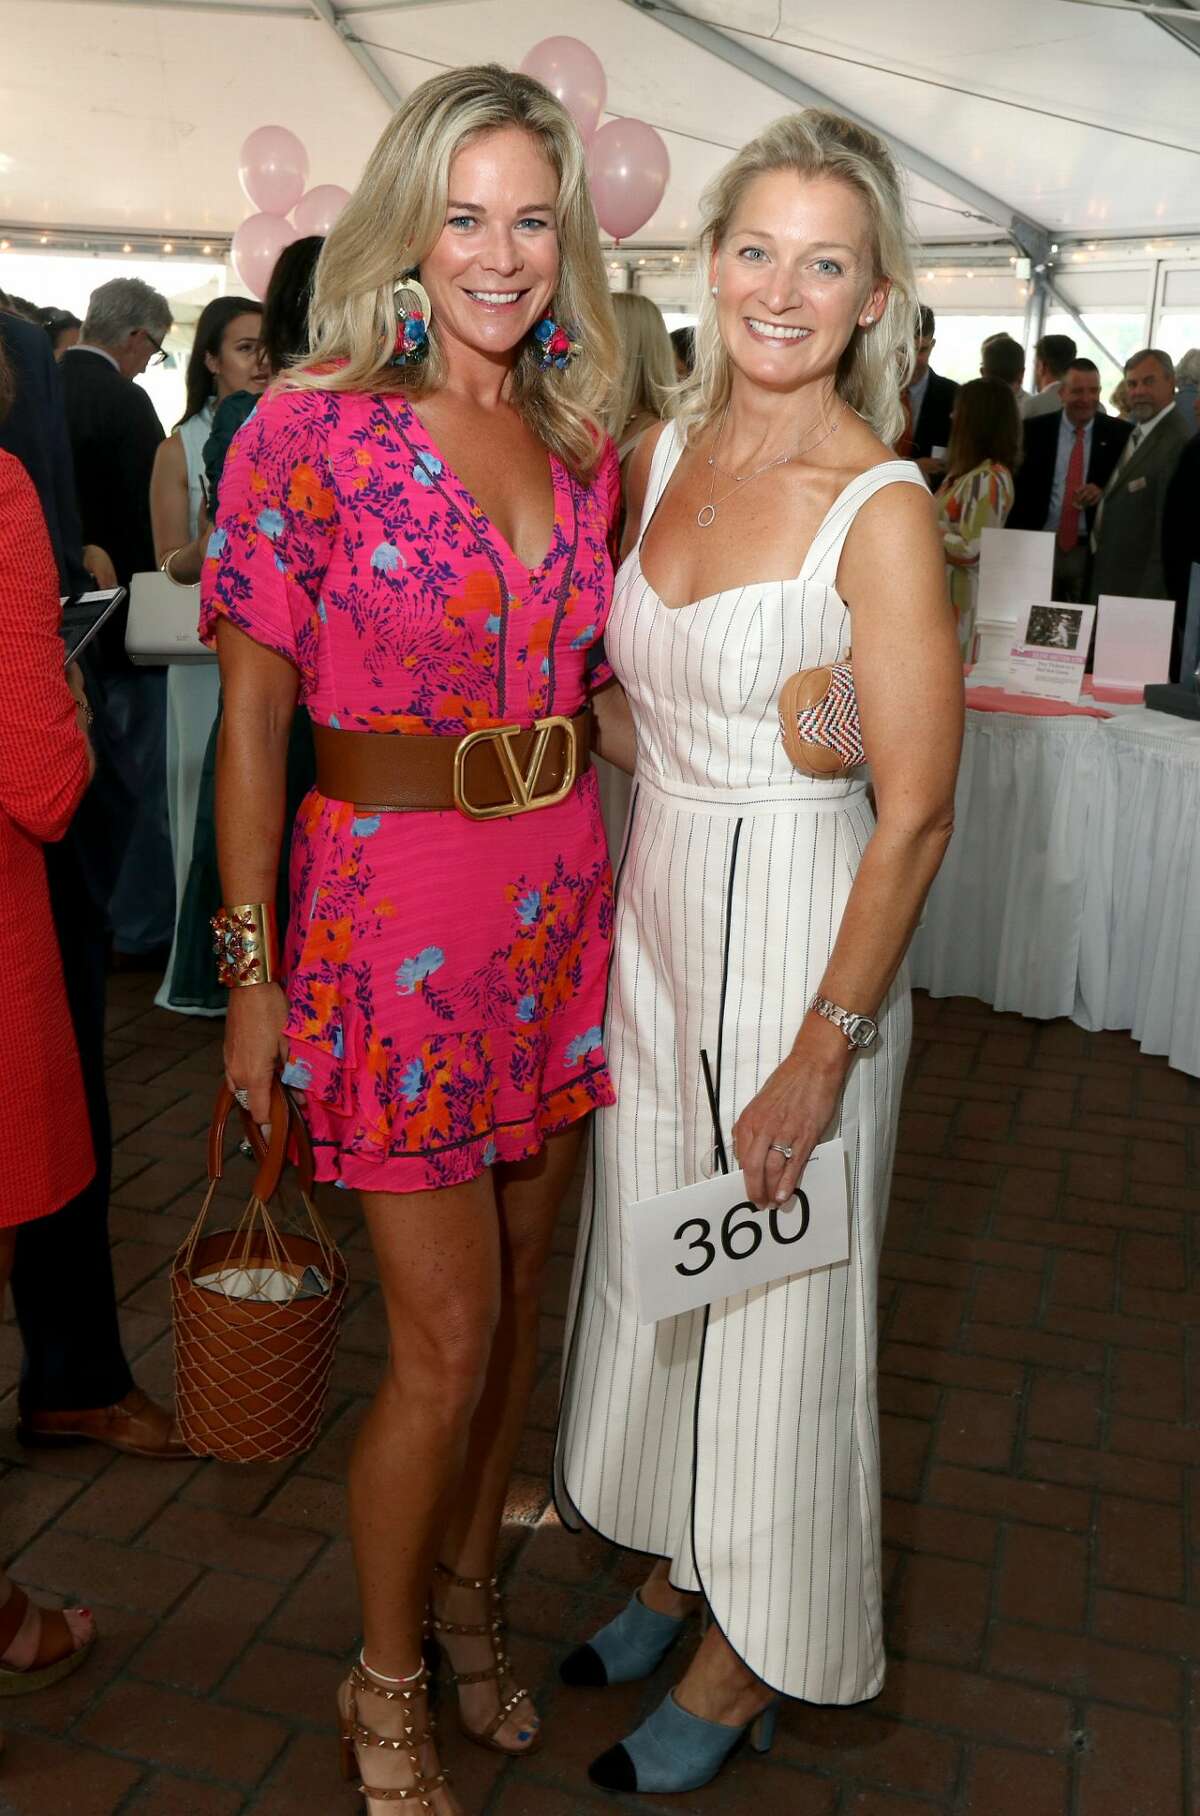 Were you Seen at the 40th Annual Polo by Twilight event, a benefit for the Palamountain Scholarships at Skidmore College, held at the Saratoga Polo Fields in Saratoga Springs on Tuesday, July 23, 2019?